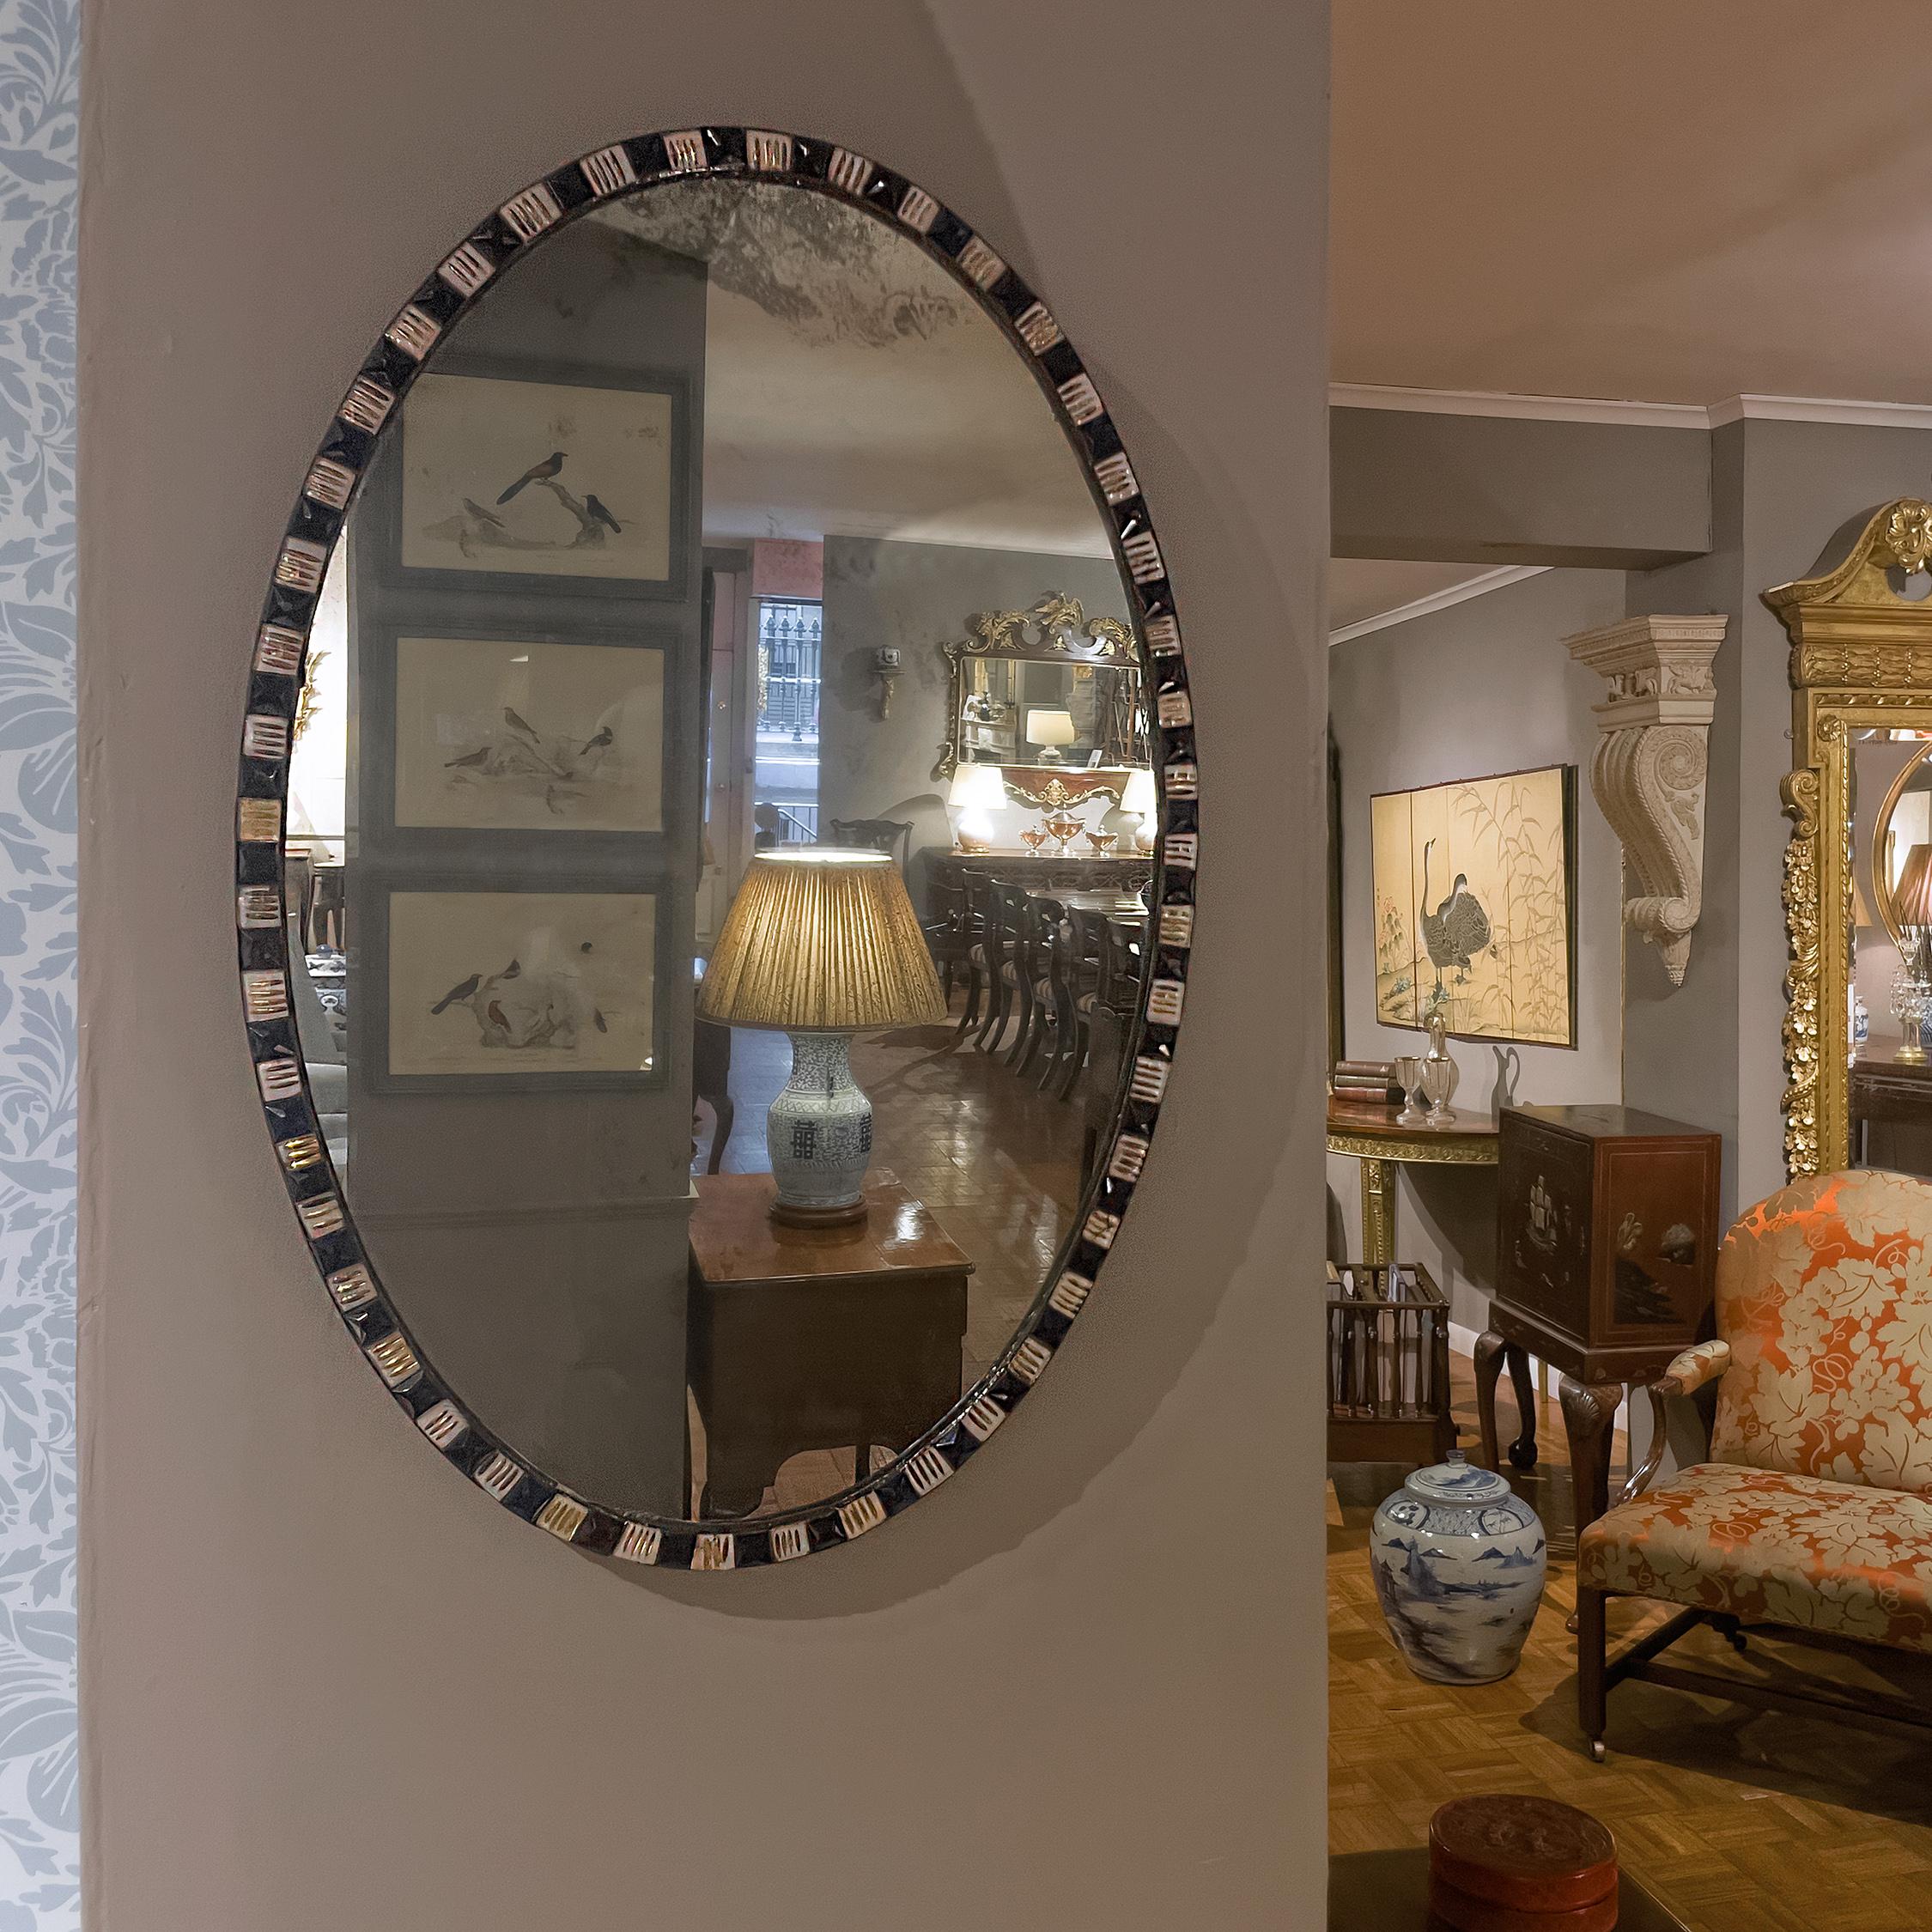 This Irish George III mirrors consists of an oval mirror plate surrounded by alternating blue and clear faceted cut glass gems (with applied gilding), set into a metal frame. County Waterford was famed for its glass production in the 18th and 19th